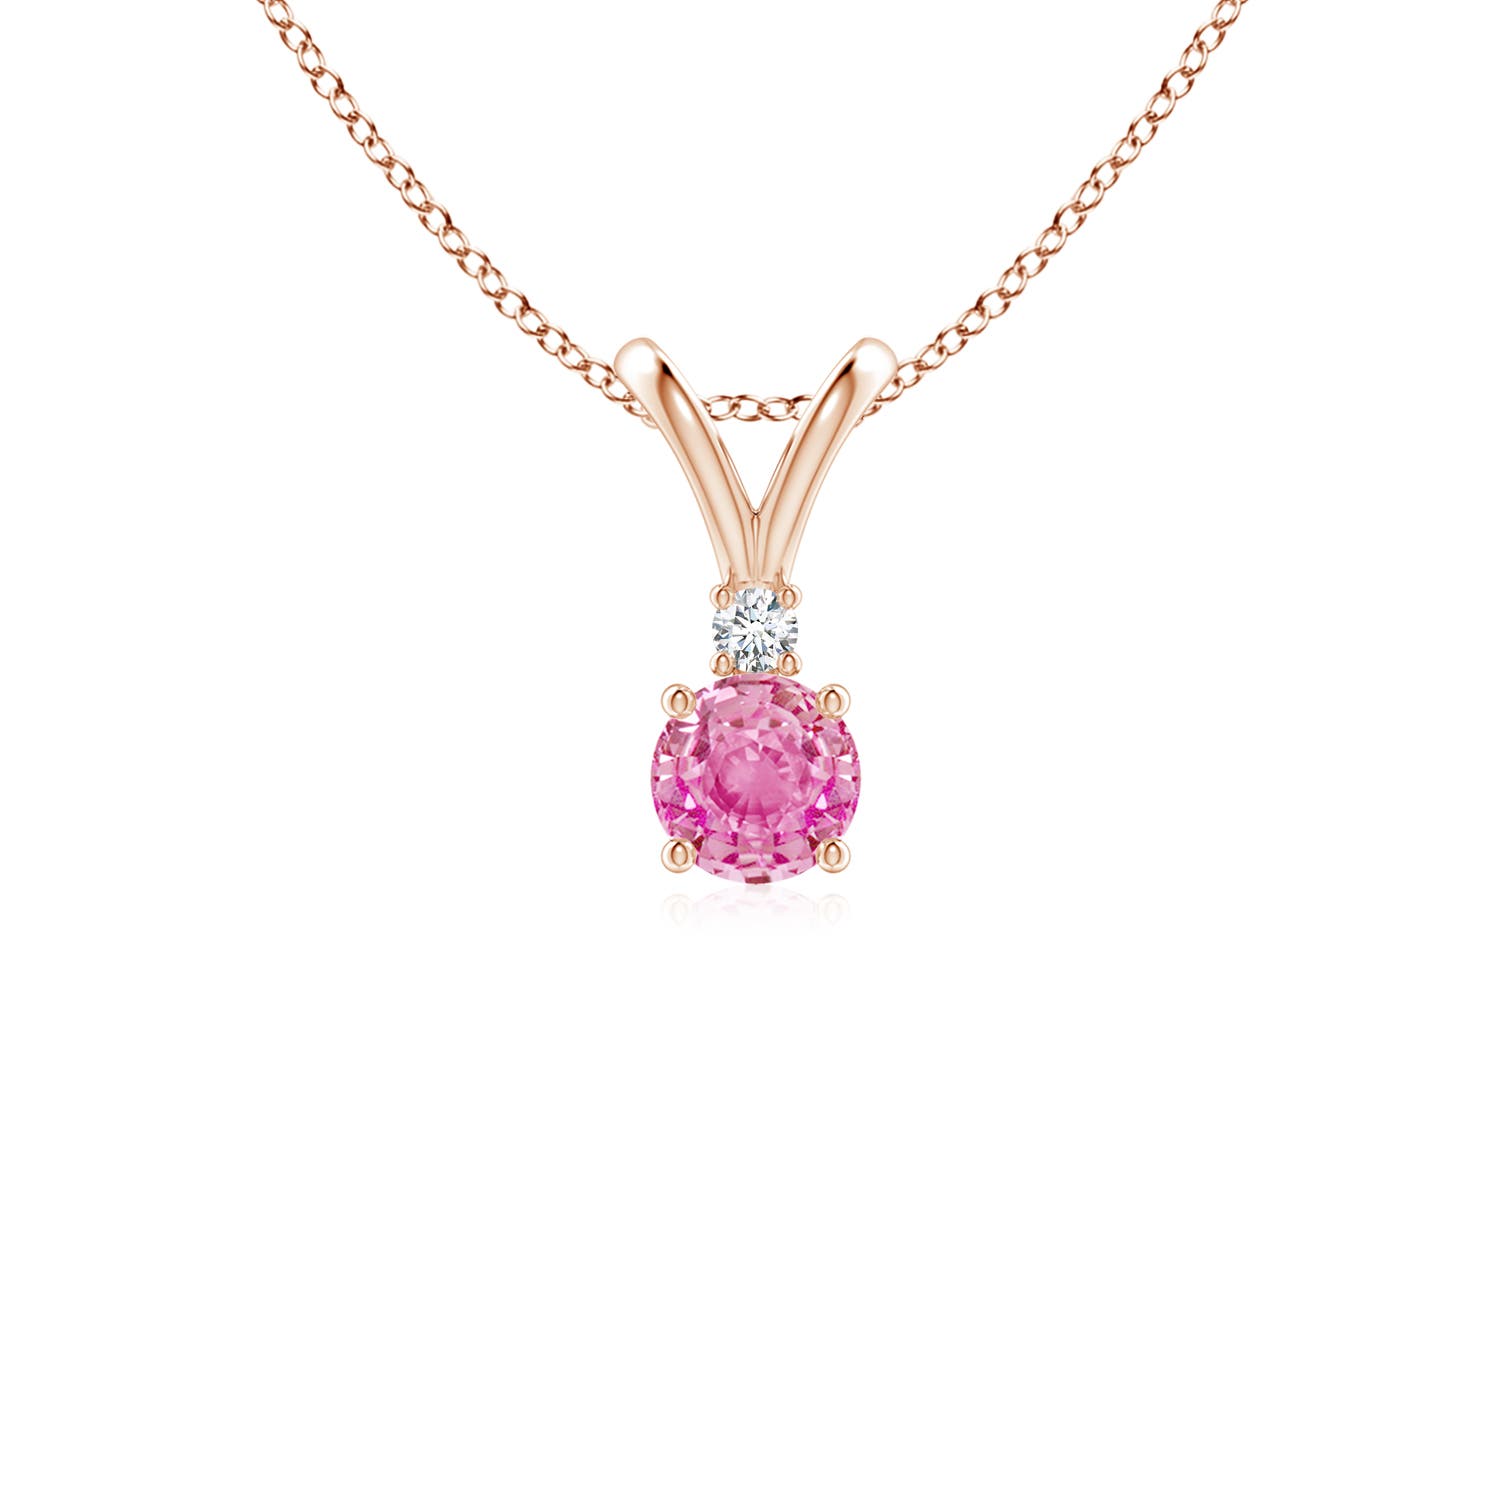 AA - Pink Sapphire / 0.34 CT / 14 KT Rose Gold